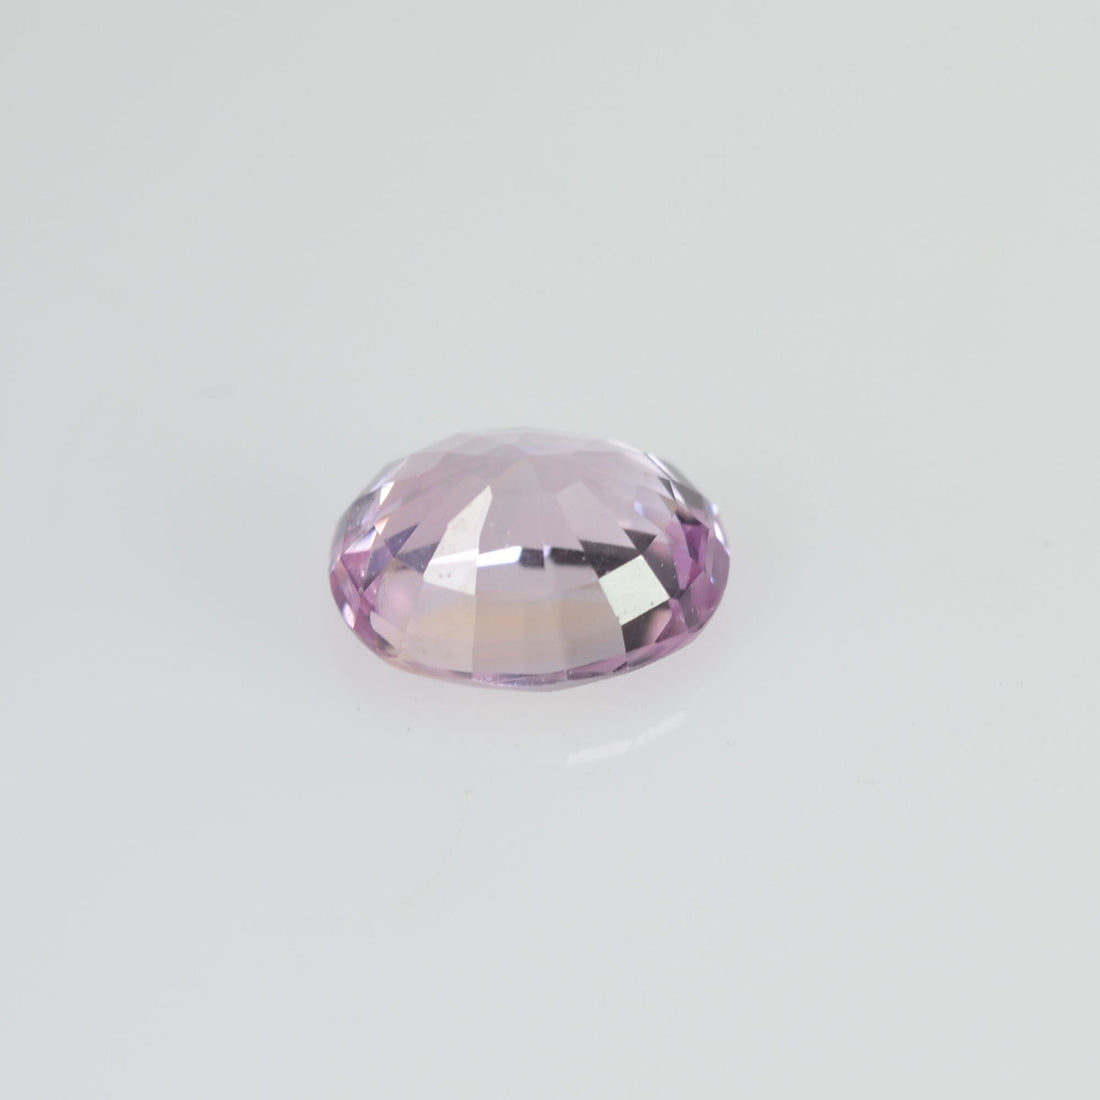 0.46 cts Natural Pink Sapphire Loose Gemstone oval Cut